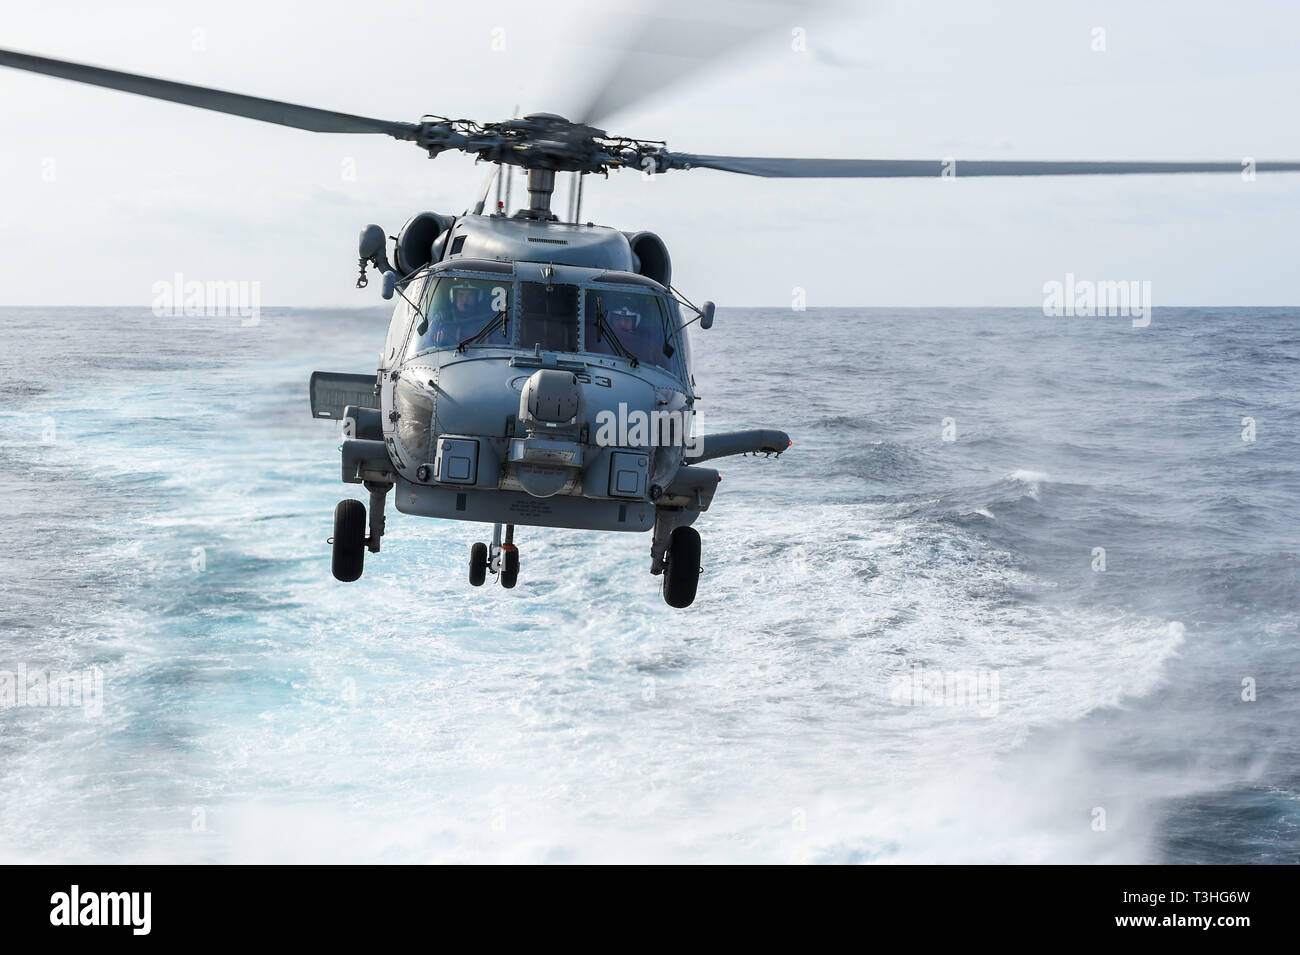 190404-N-UM706-0147 ATLANTIC OCEAN (April 4, 2019) An MH-60R Sea Hawk Helicopter assigned to the “Grandmasters” of Helicopter Maritime Strike Squadron (HSM) 46 takes off of the flight deck aboard the Arleigh Burke-class guided-missile destroyer USS Nitze (DDG 94). Nitze is underway as part of Abraham Lincoln Carrier Strike Group (ABECSG) deployment in support of maritime security cooperation efforts in the U.S. 5th, 6th and 7th Fleet areas of responsibility. With Abraham Lincoln as the flagship, deployed strike group assets include staffs, ships and aircraft of Carrier Strike Group 12 (CSG 12) Stock Photo